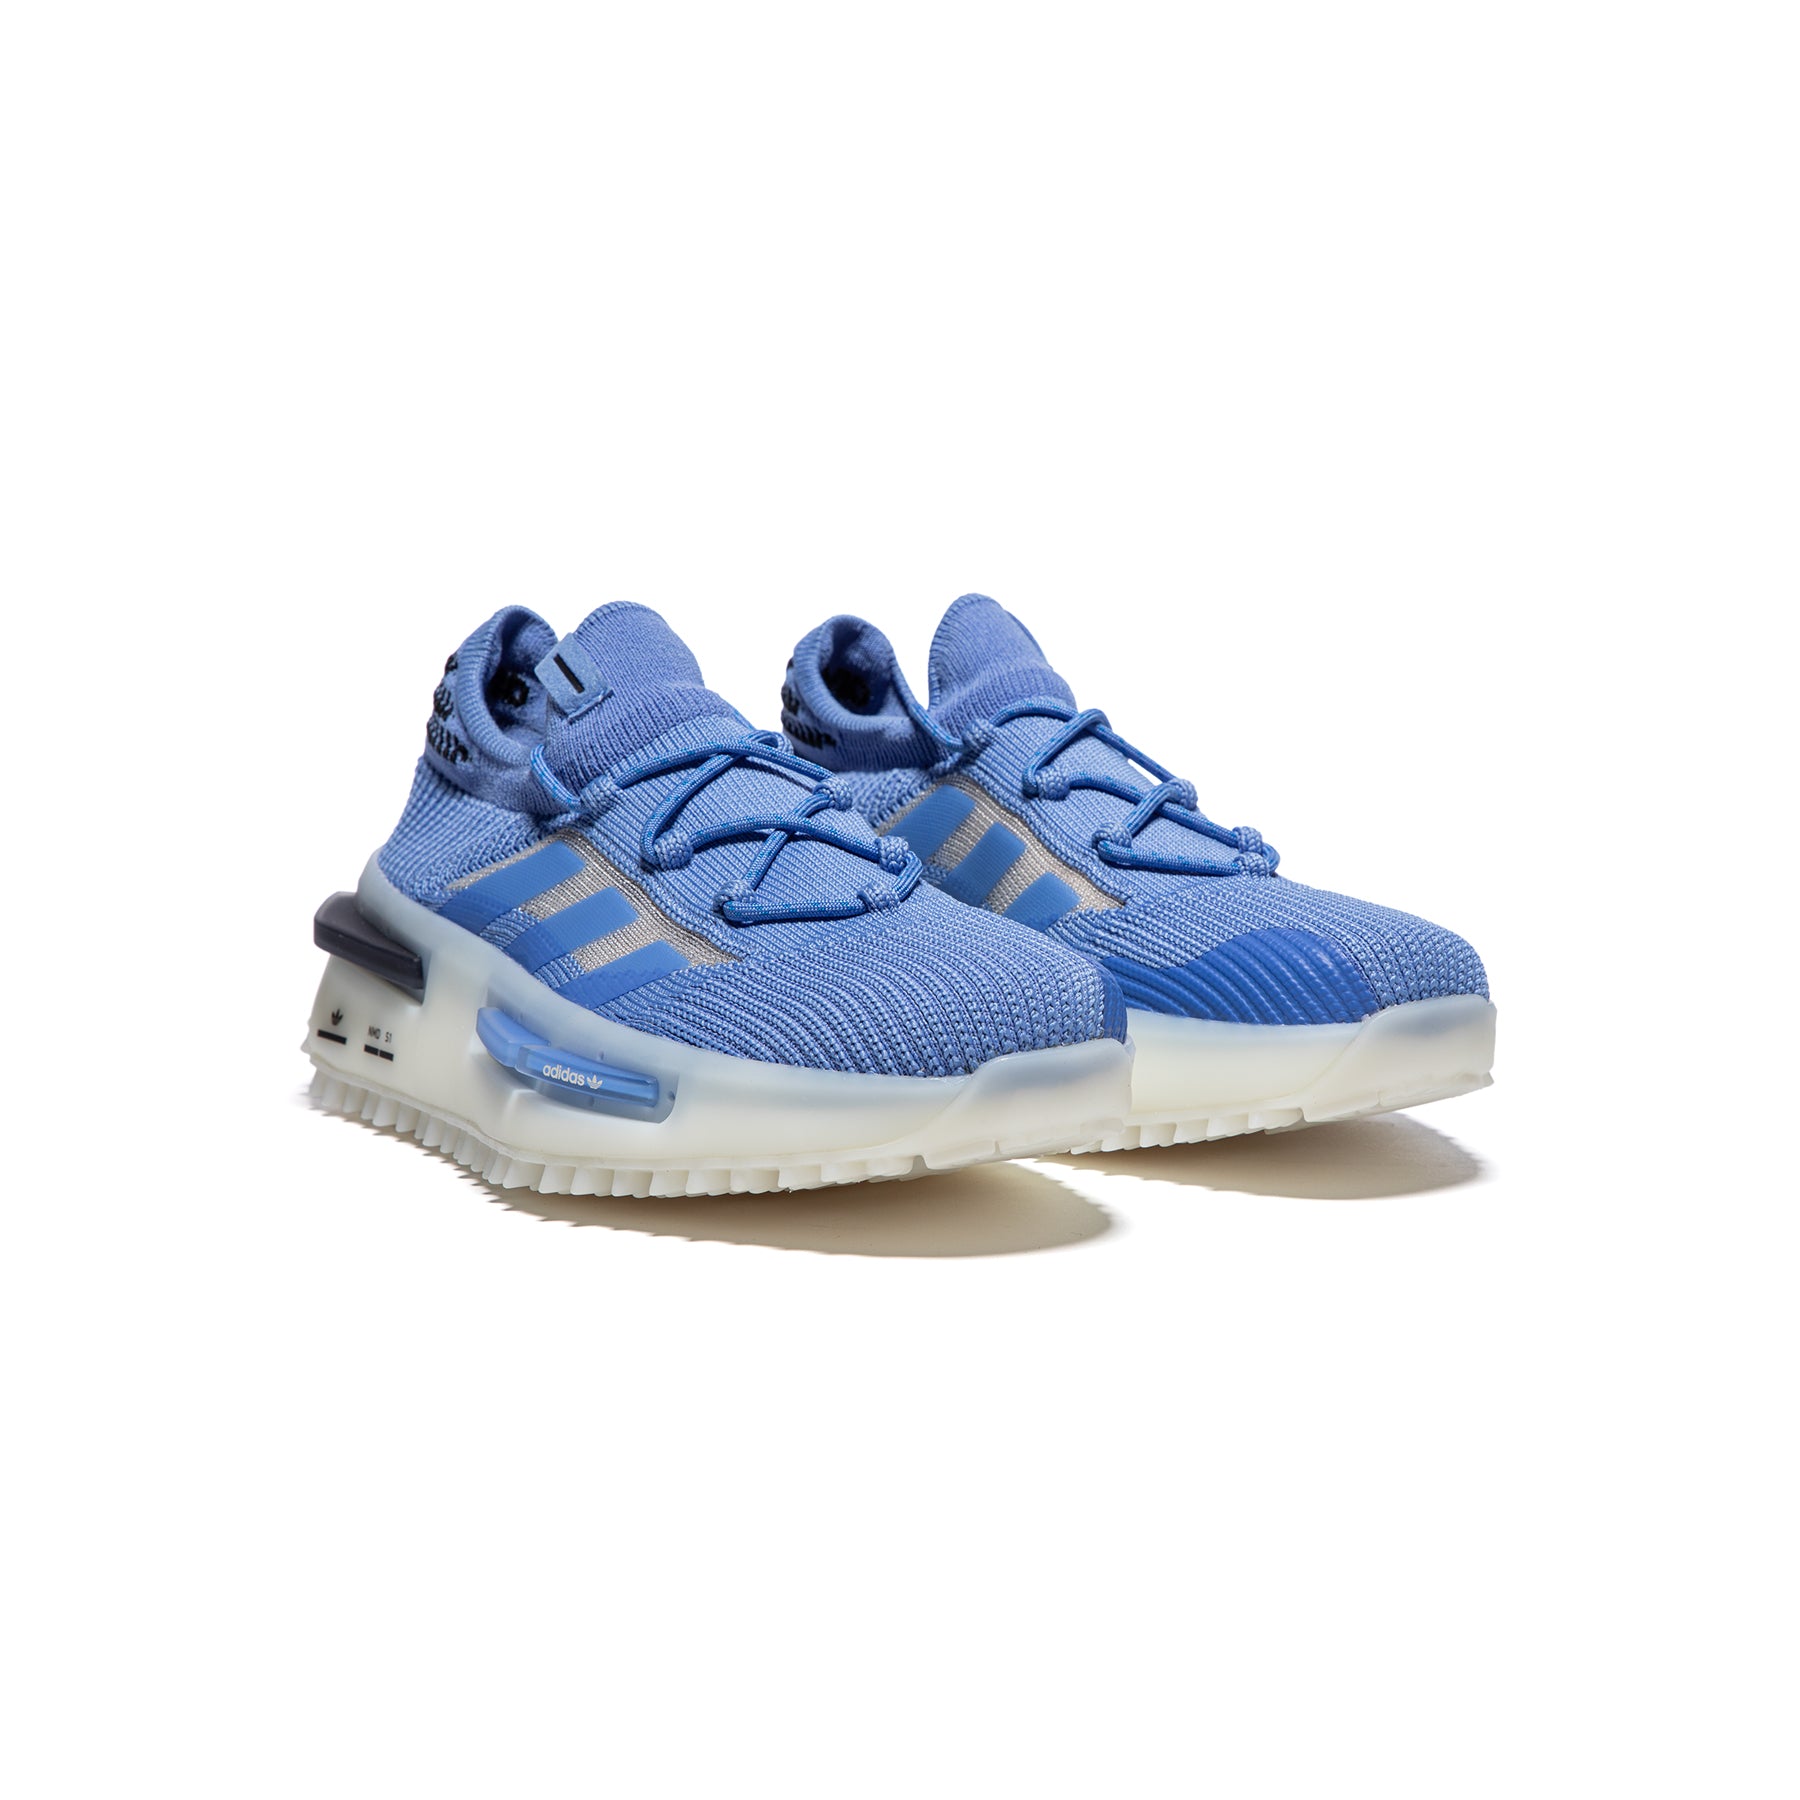 NMD adidas – Fusion/Off S1 Concepts (Blue White/Cloud Womens White)